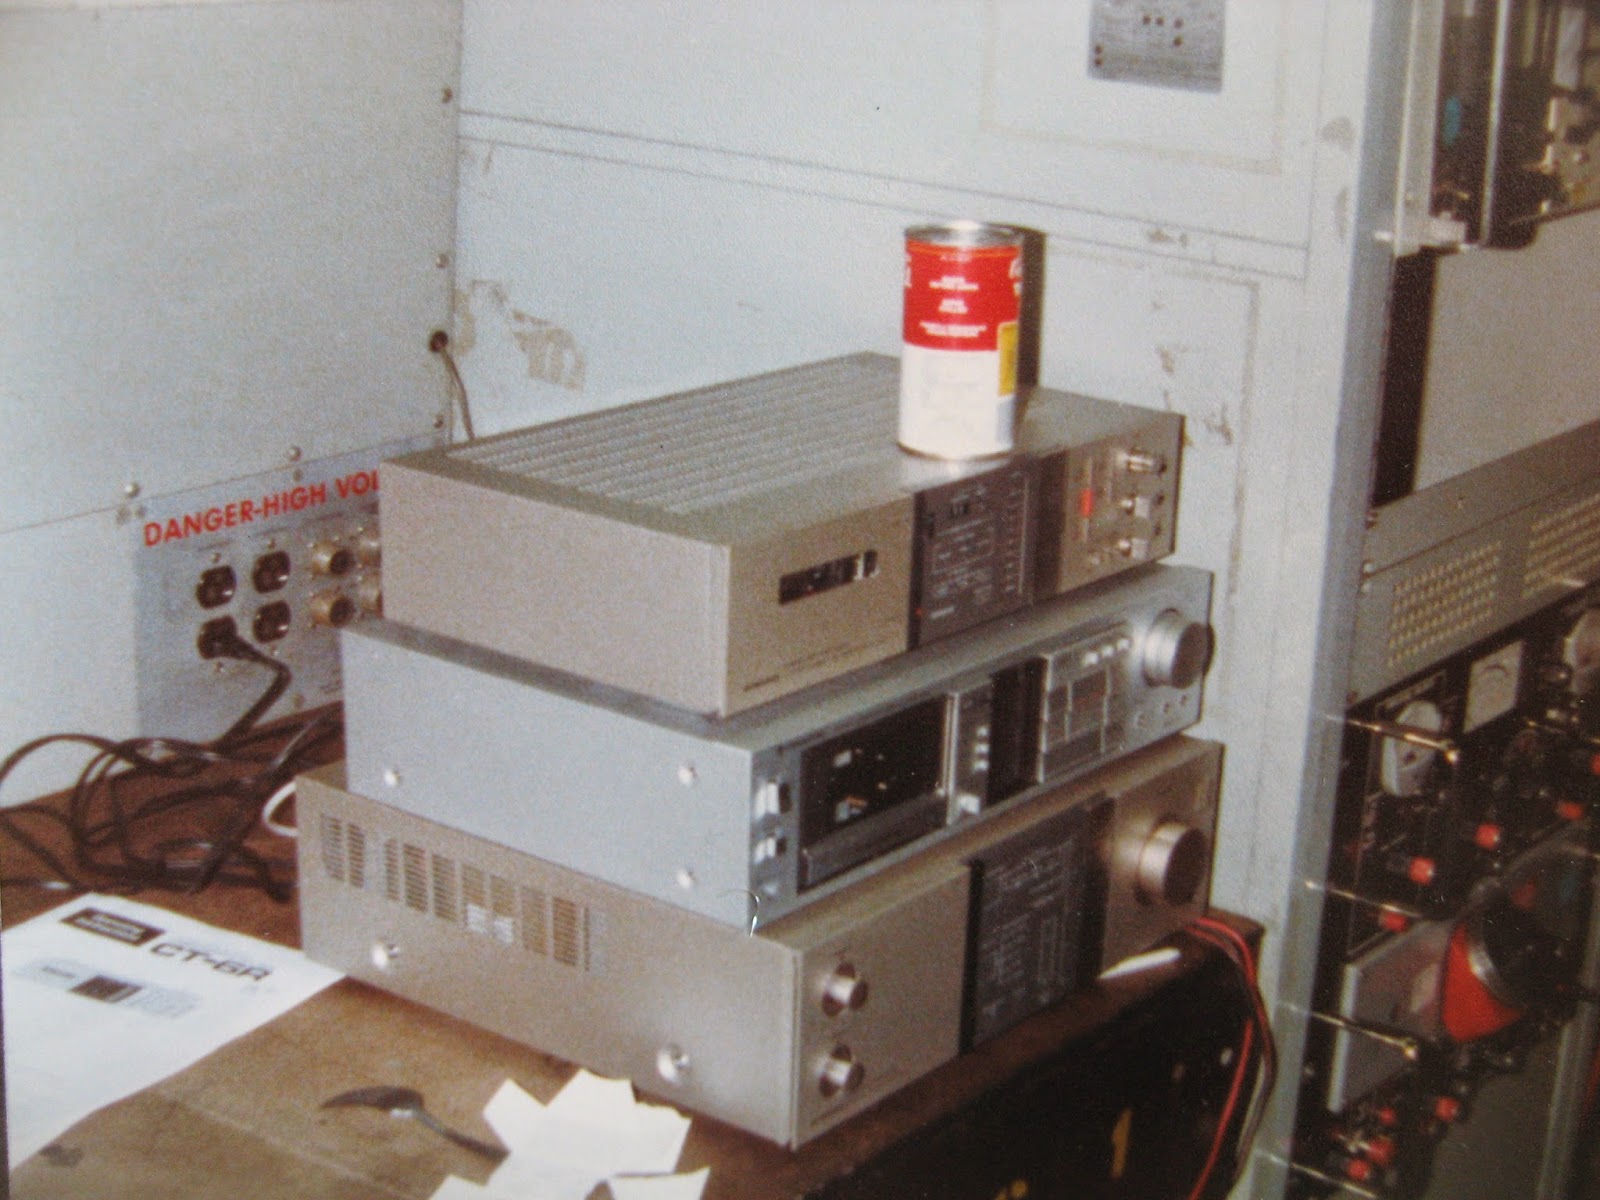 Stereo set up in the Calibration Lab shop 670 on board USS Nimitz 1982